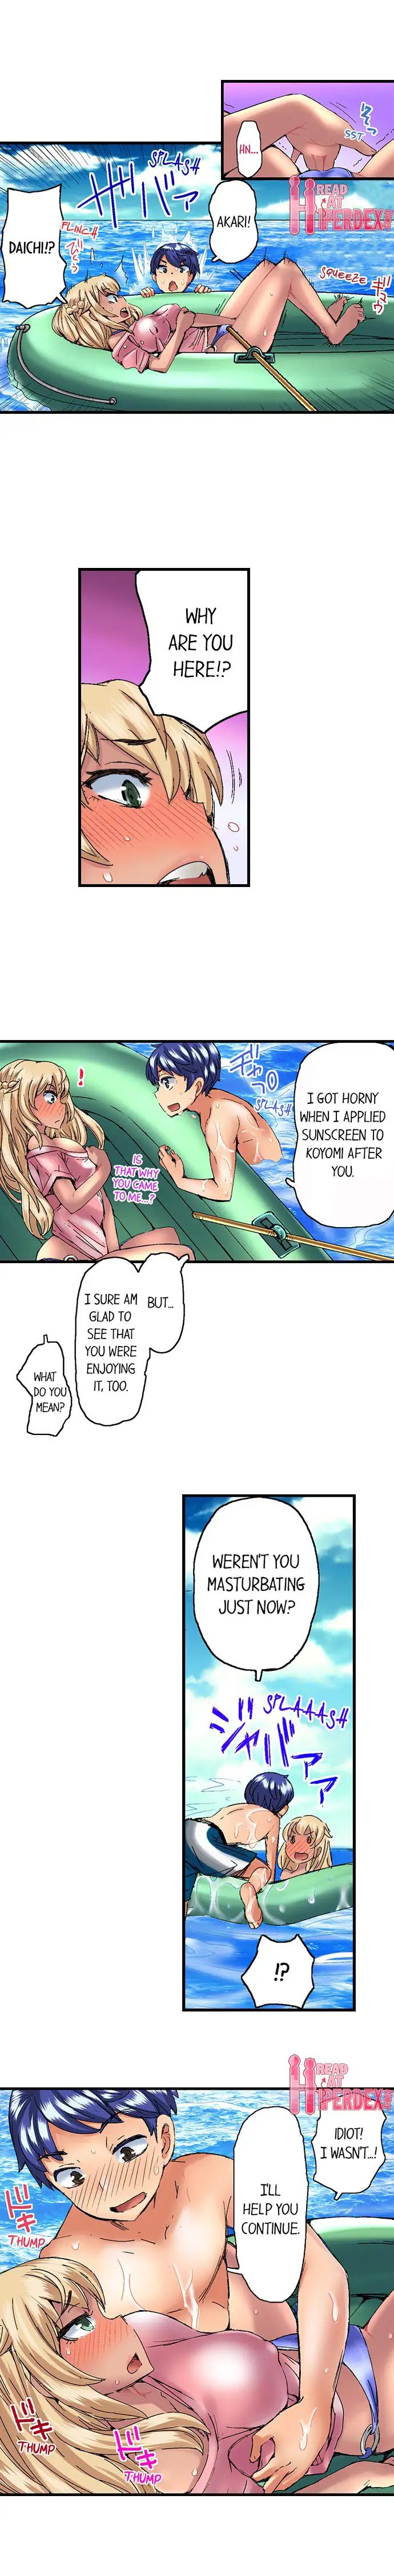 Taking a Hot Tanned Chick’s Virginity - Chapter 8 Page 9